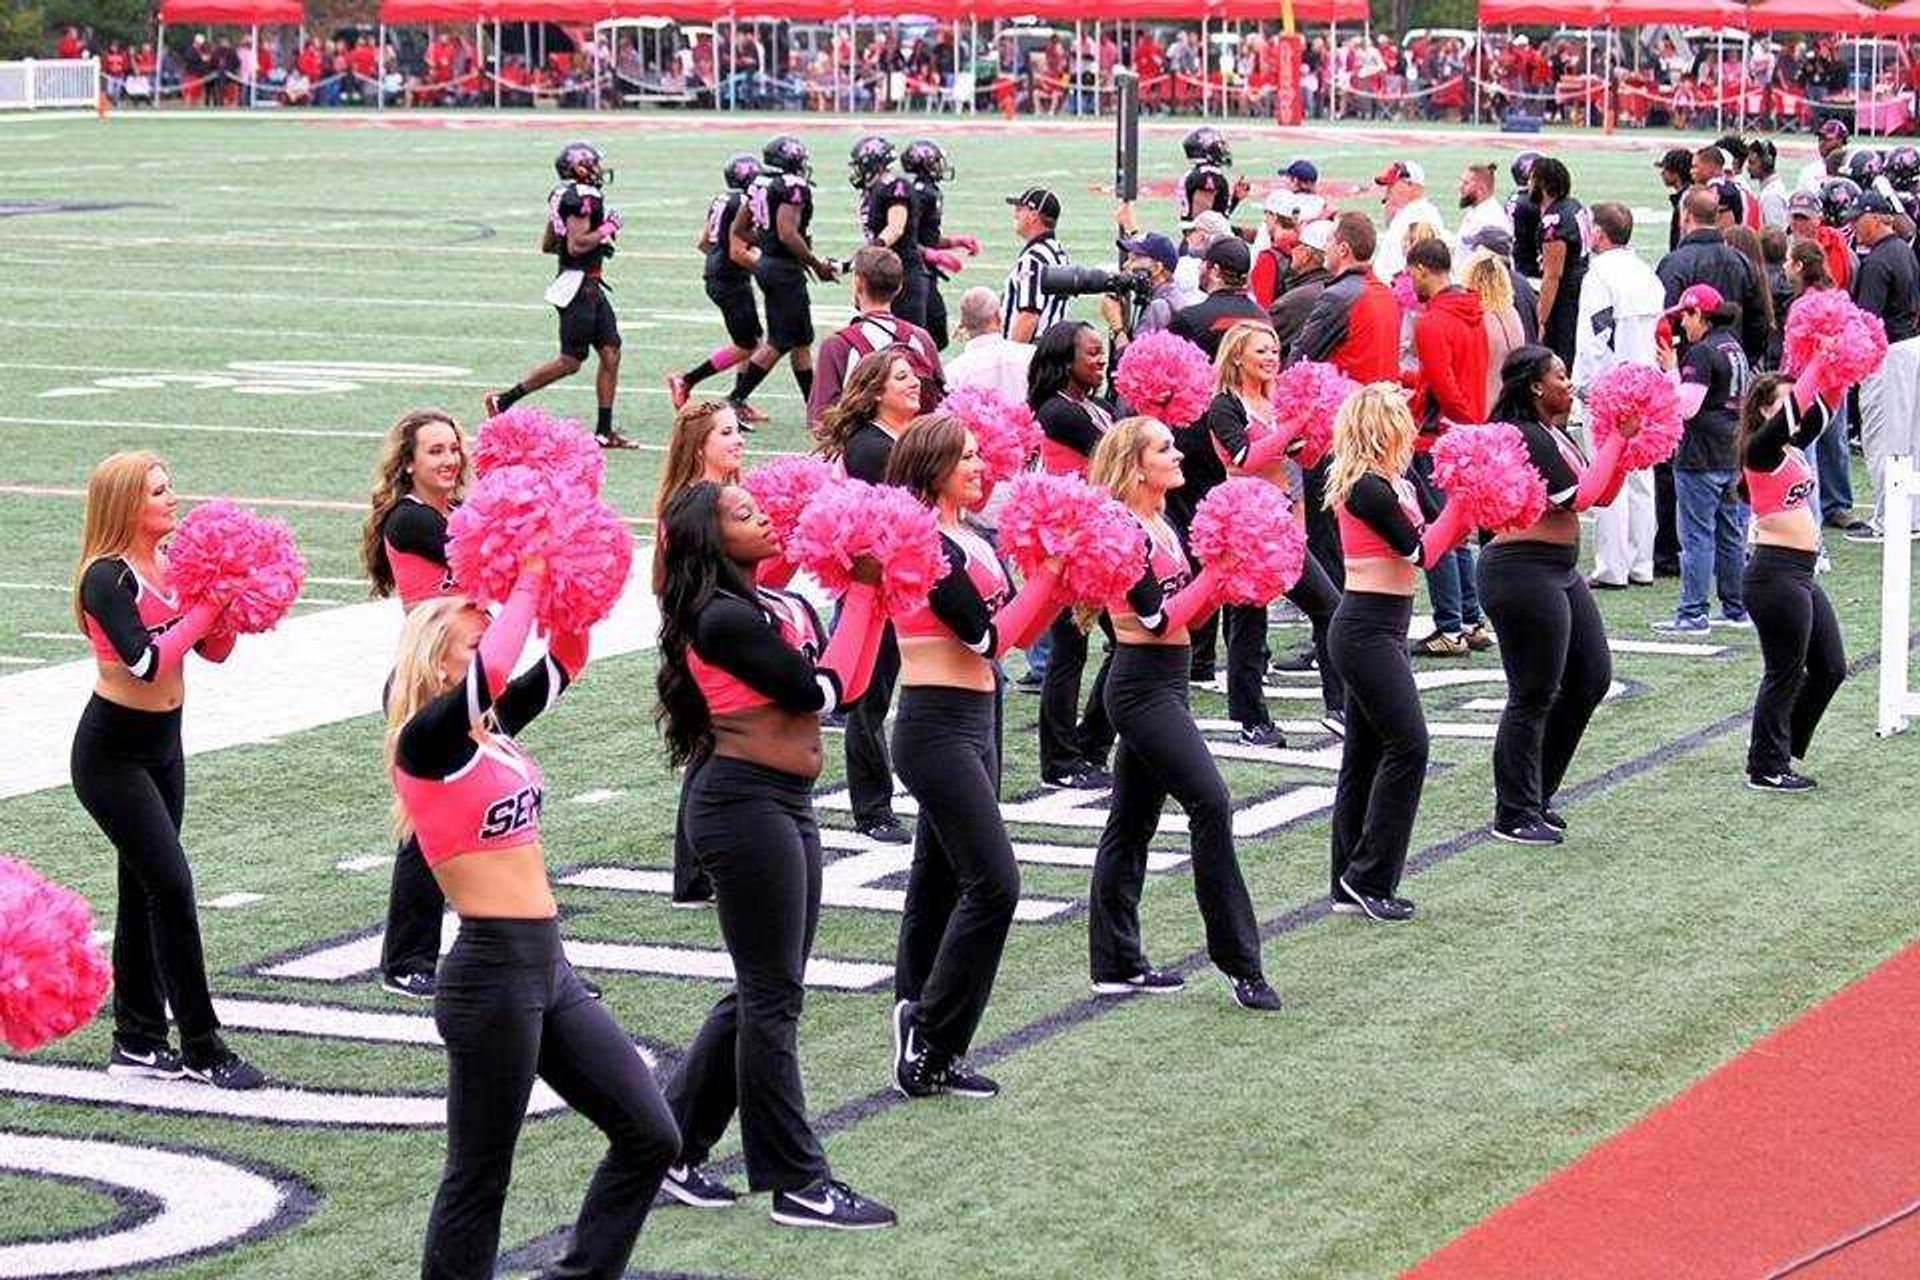 Southeast Sundancers welcome the football team on the field during the annual Pink Up Cape game on Nov. 4 against UT Martin.